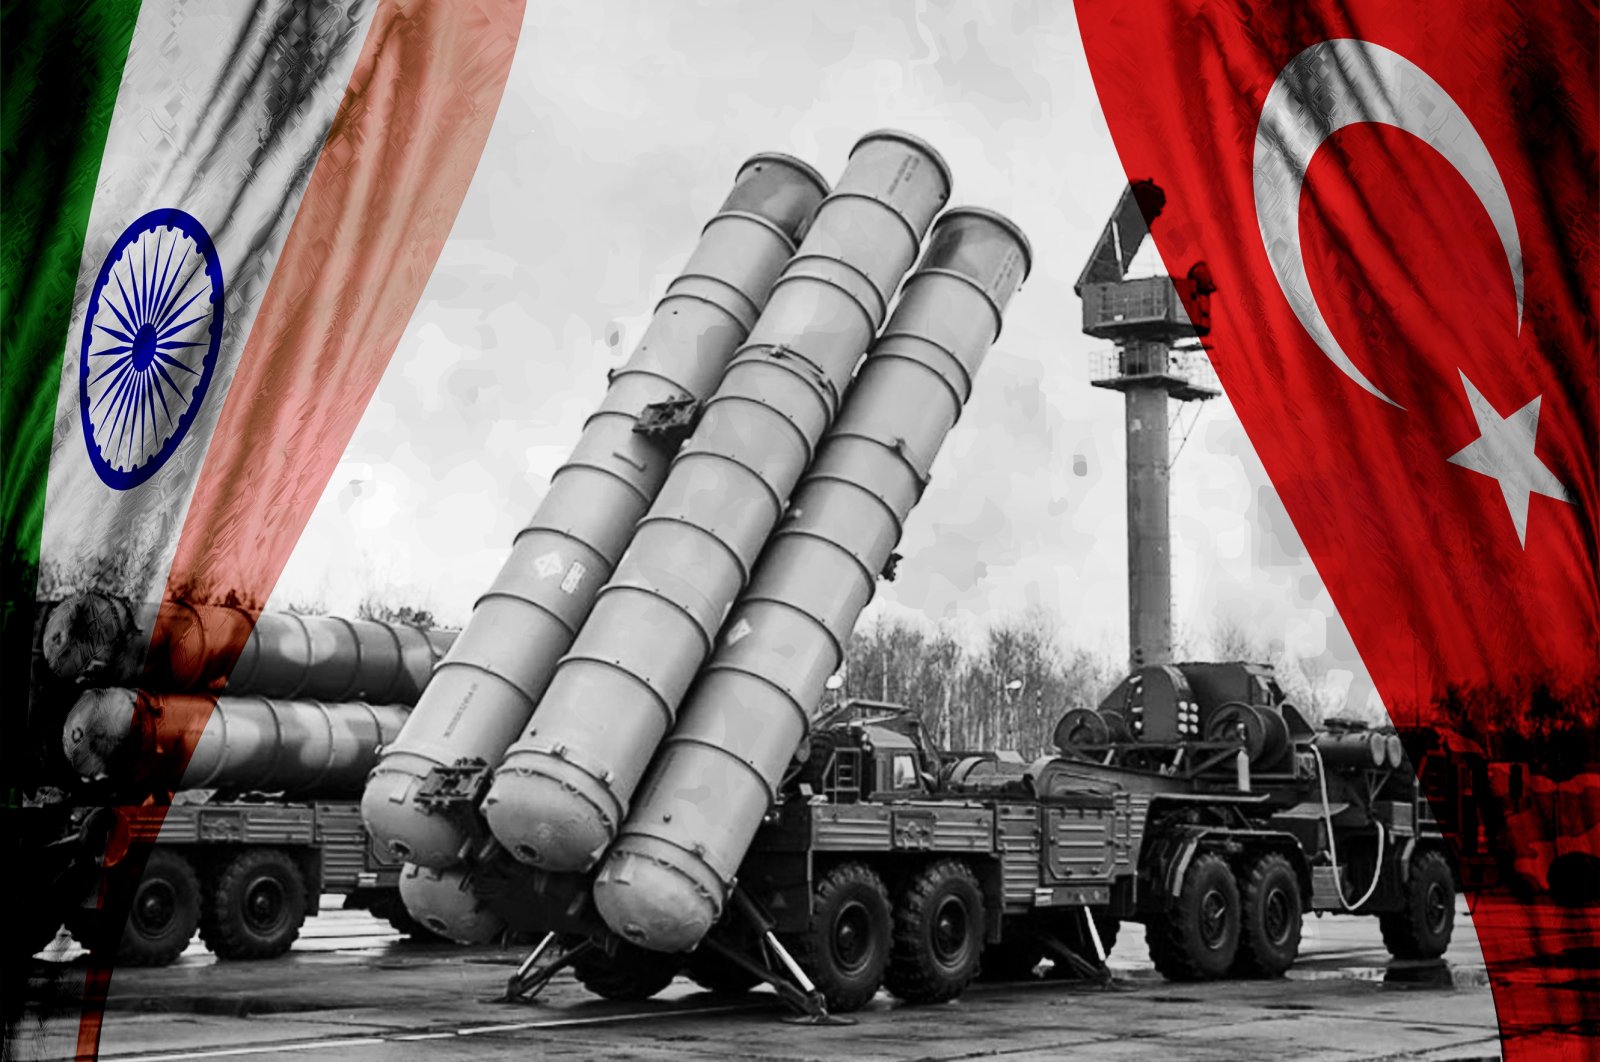 A photo edited by Büşra Öztürk shows the Russian S-400 air defense system with the flags of Turkey and India seen on the right and left corners.